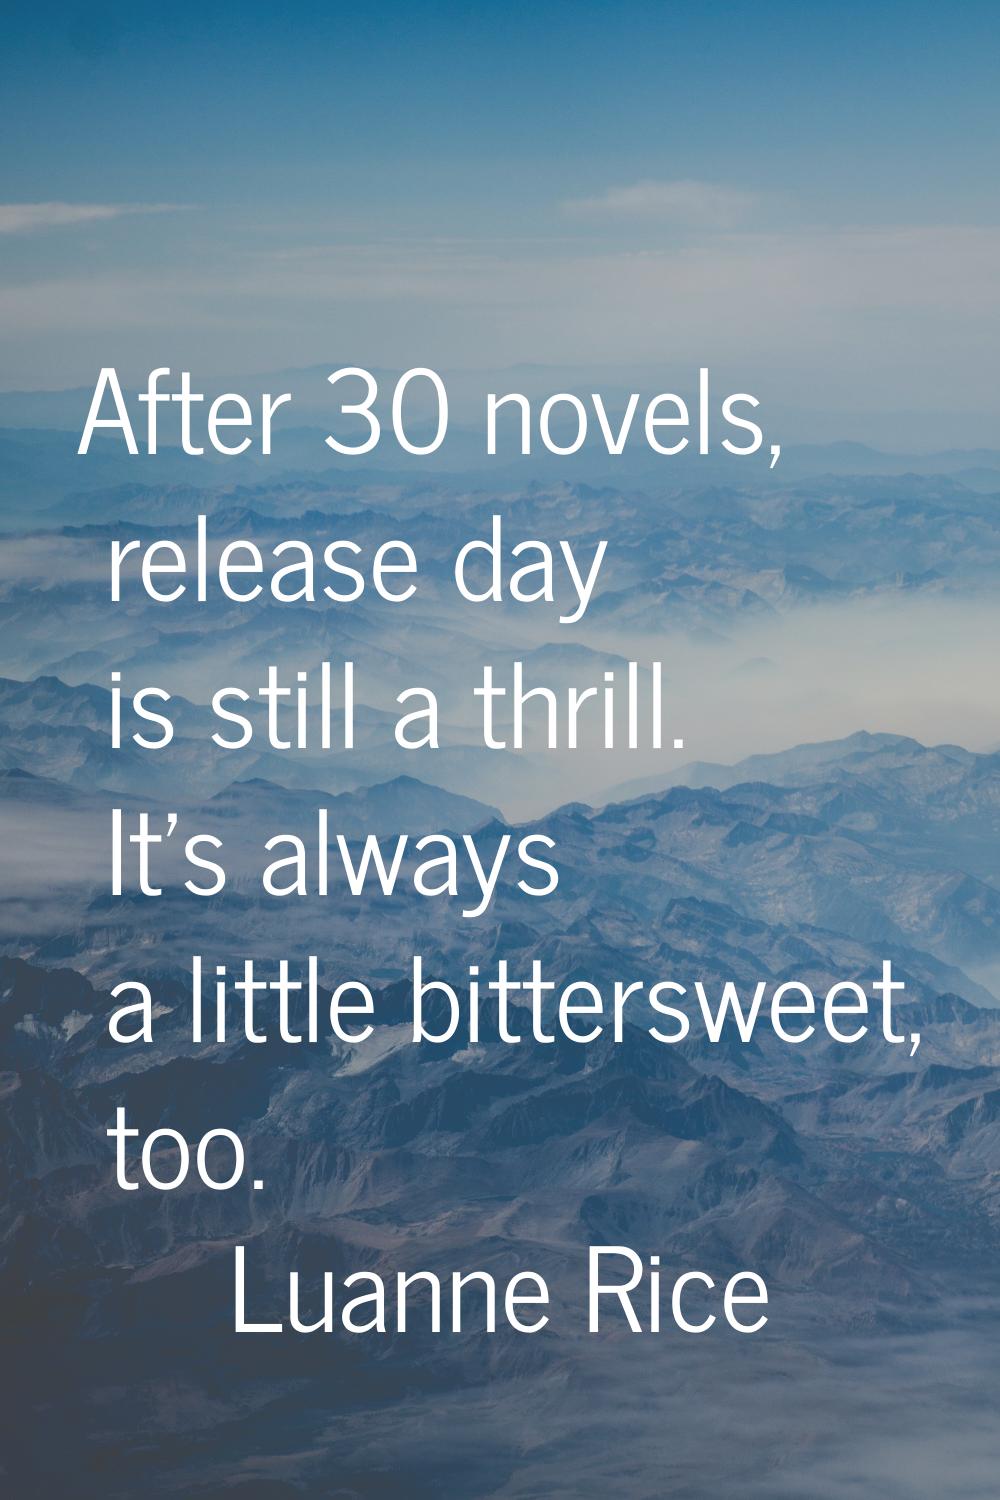 After 30 novels, release day is still a thrill. It's always a little bittersweet, too.